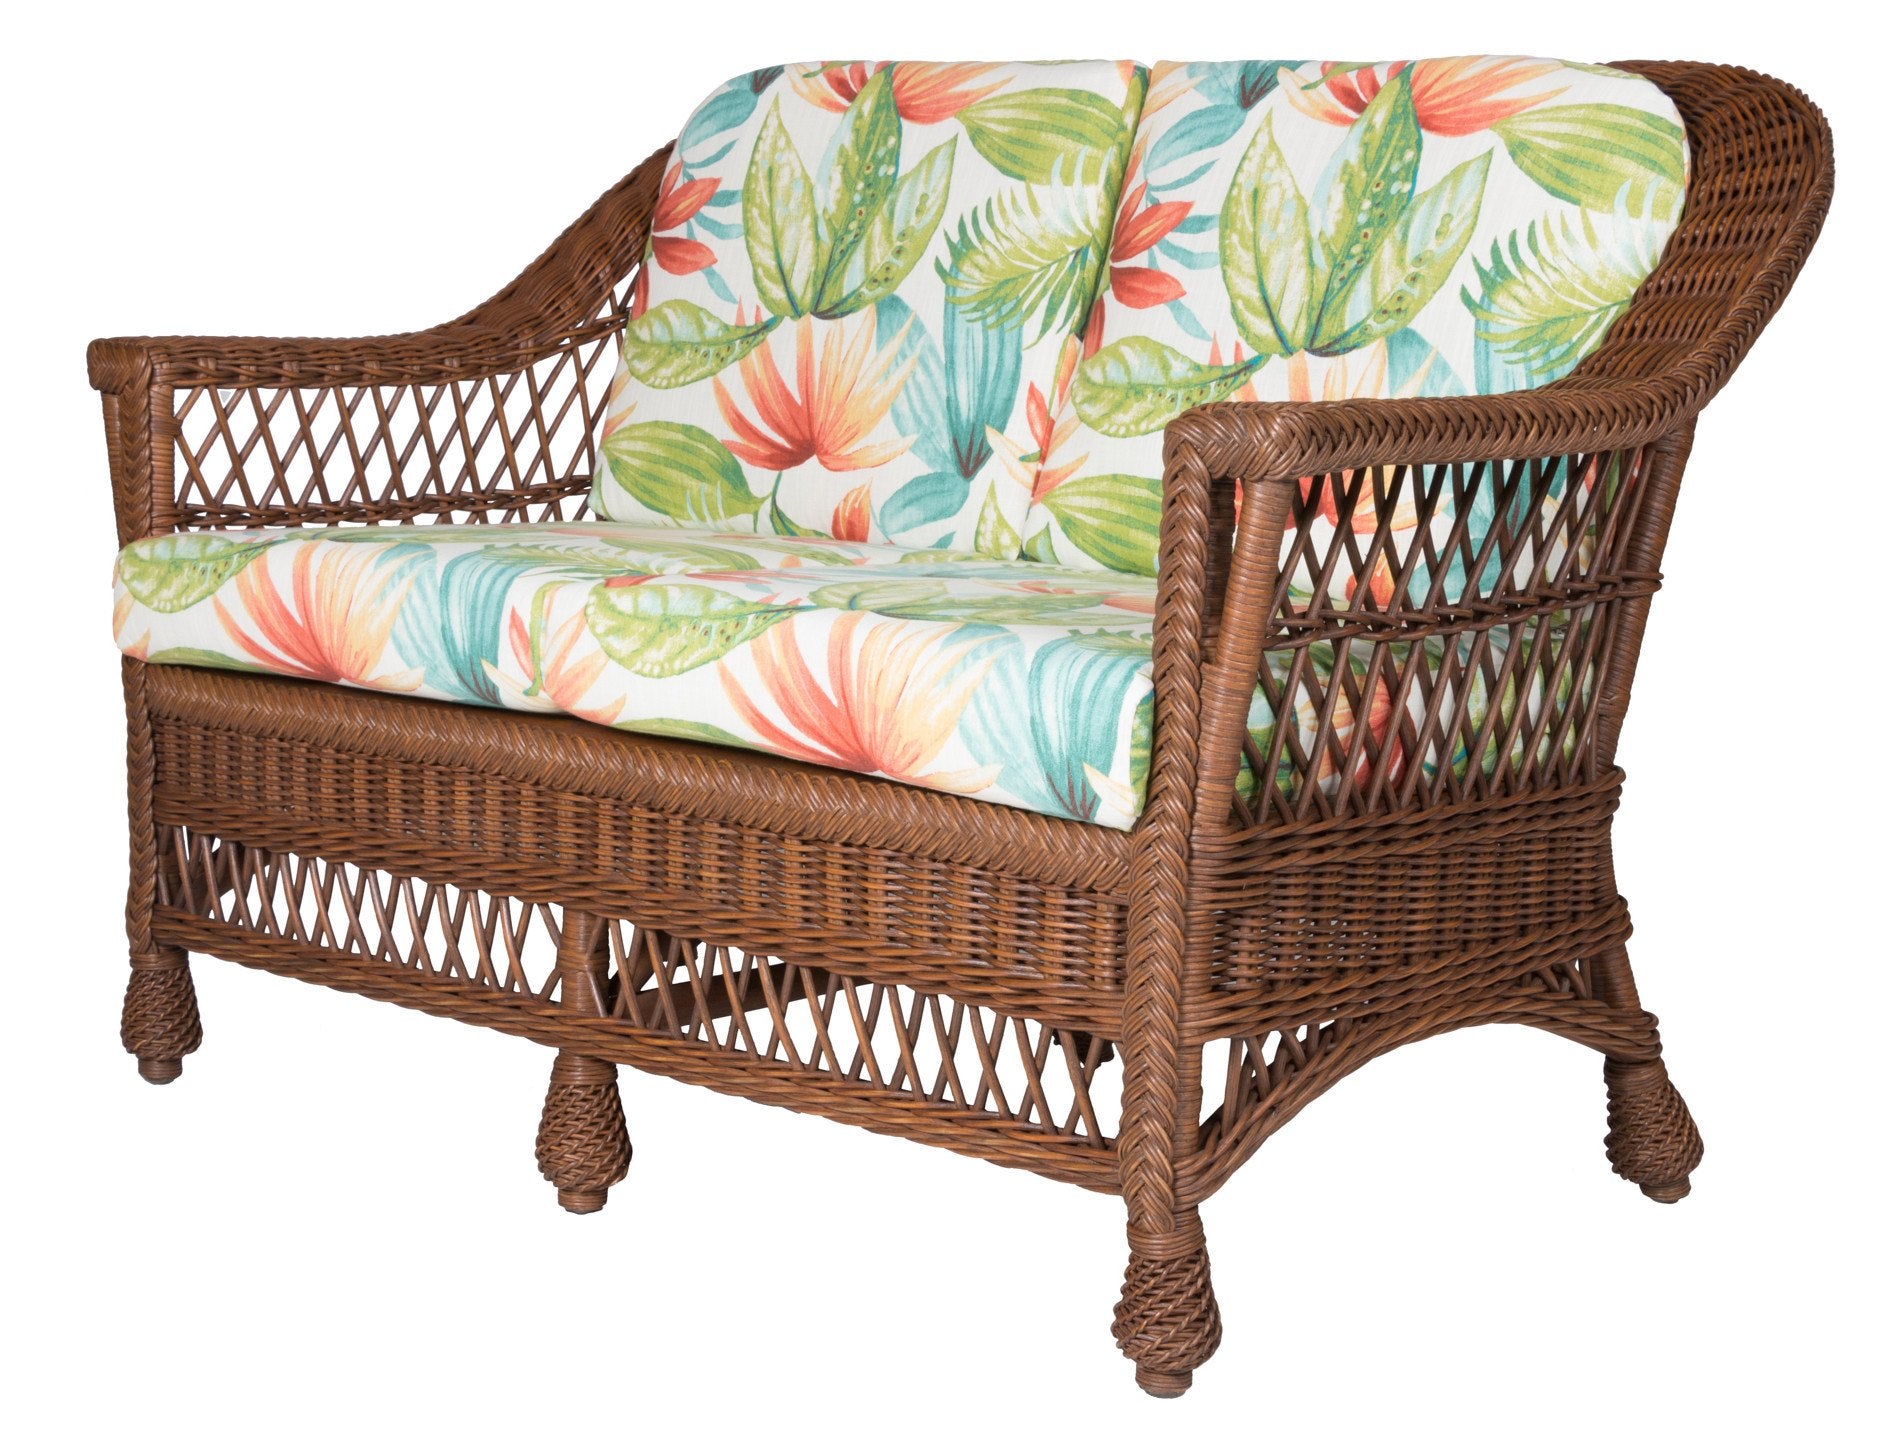 Designer Wicker & Rattan By Tribor Harbor Front Loveseat Designer Wicker from Tribor Loveseat - Rattan Imports